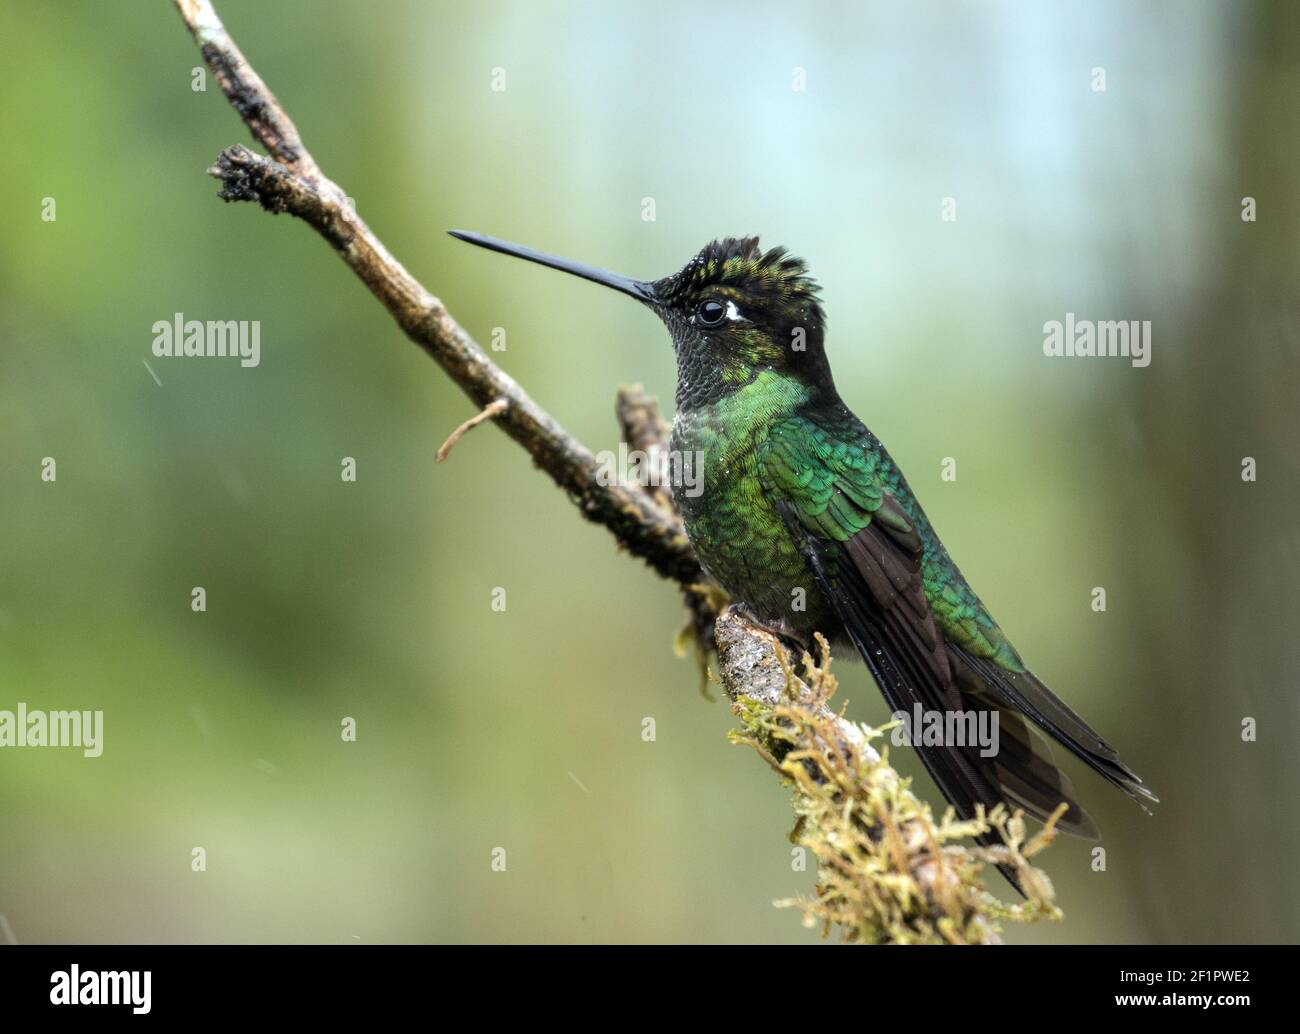 Closeup of male Talamanca Hummingbird perched on a mossy branch in Panama. Stock Photo